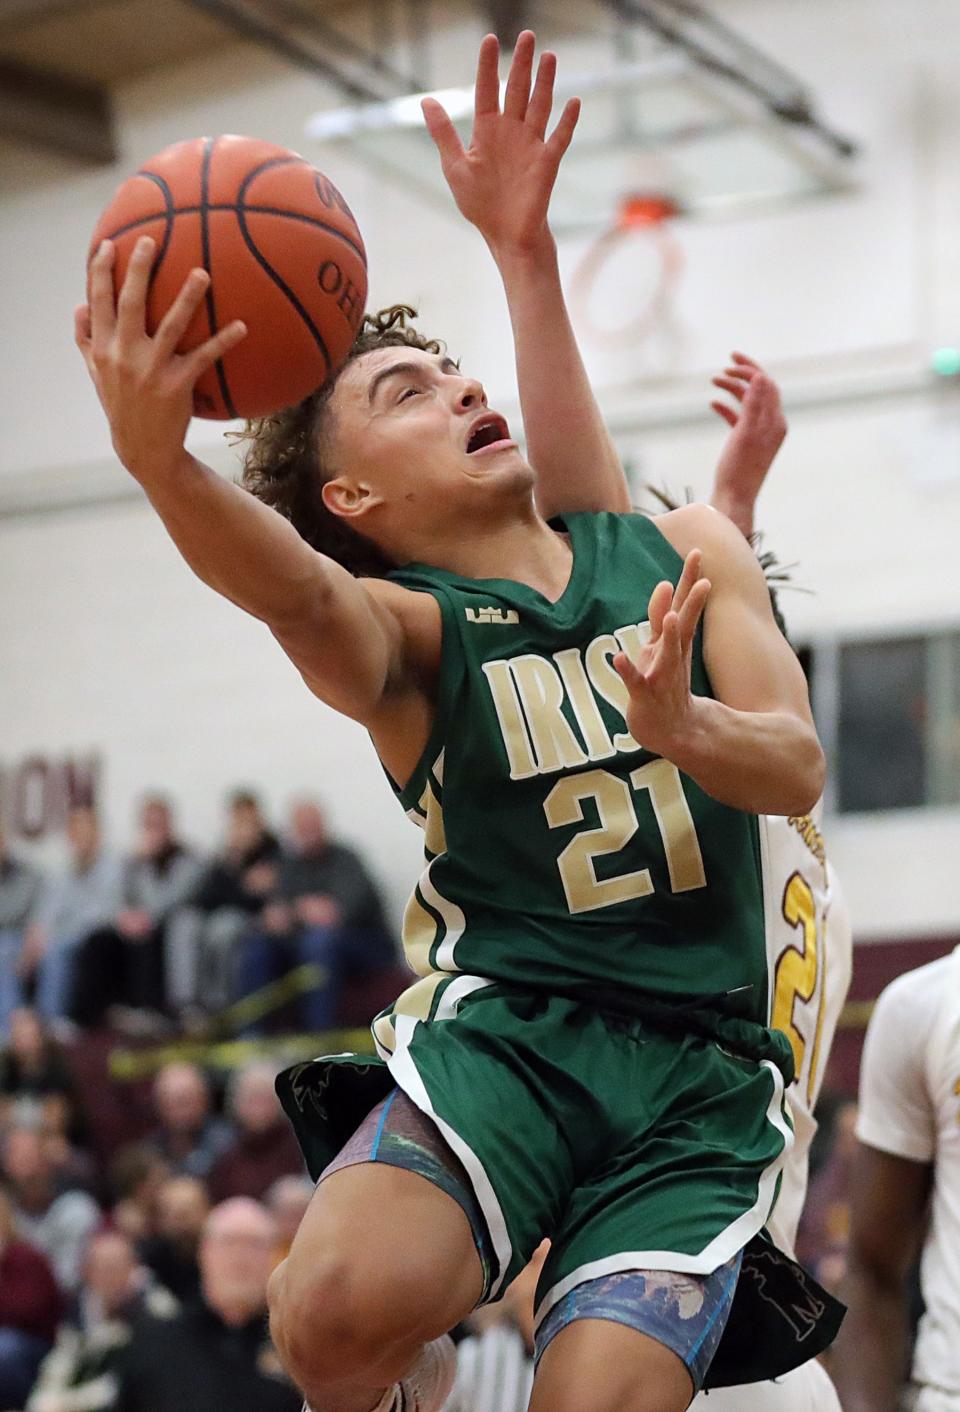 STVM guard Jayson Walker attempts a layup during the first half of a basketball game, Tuesday, Dec. 13, 2022, in Cuyahoga Falls, Ohio.